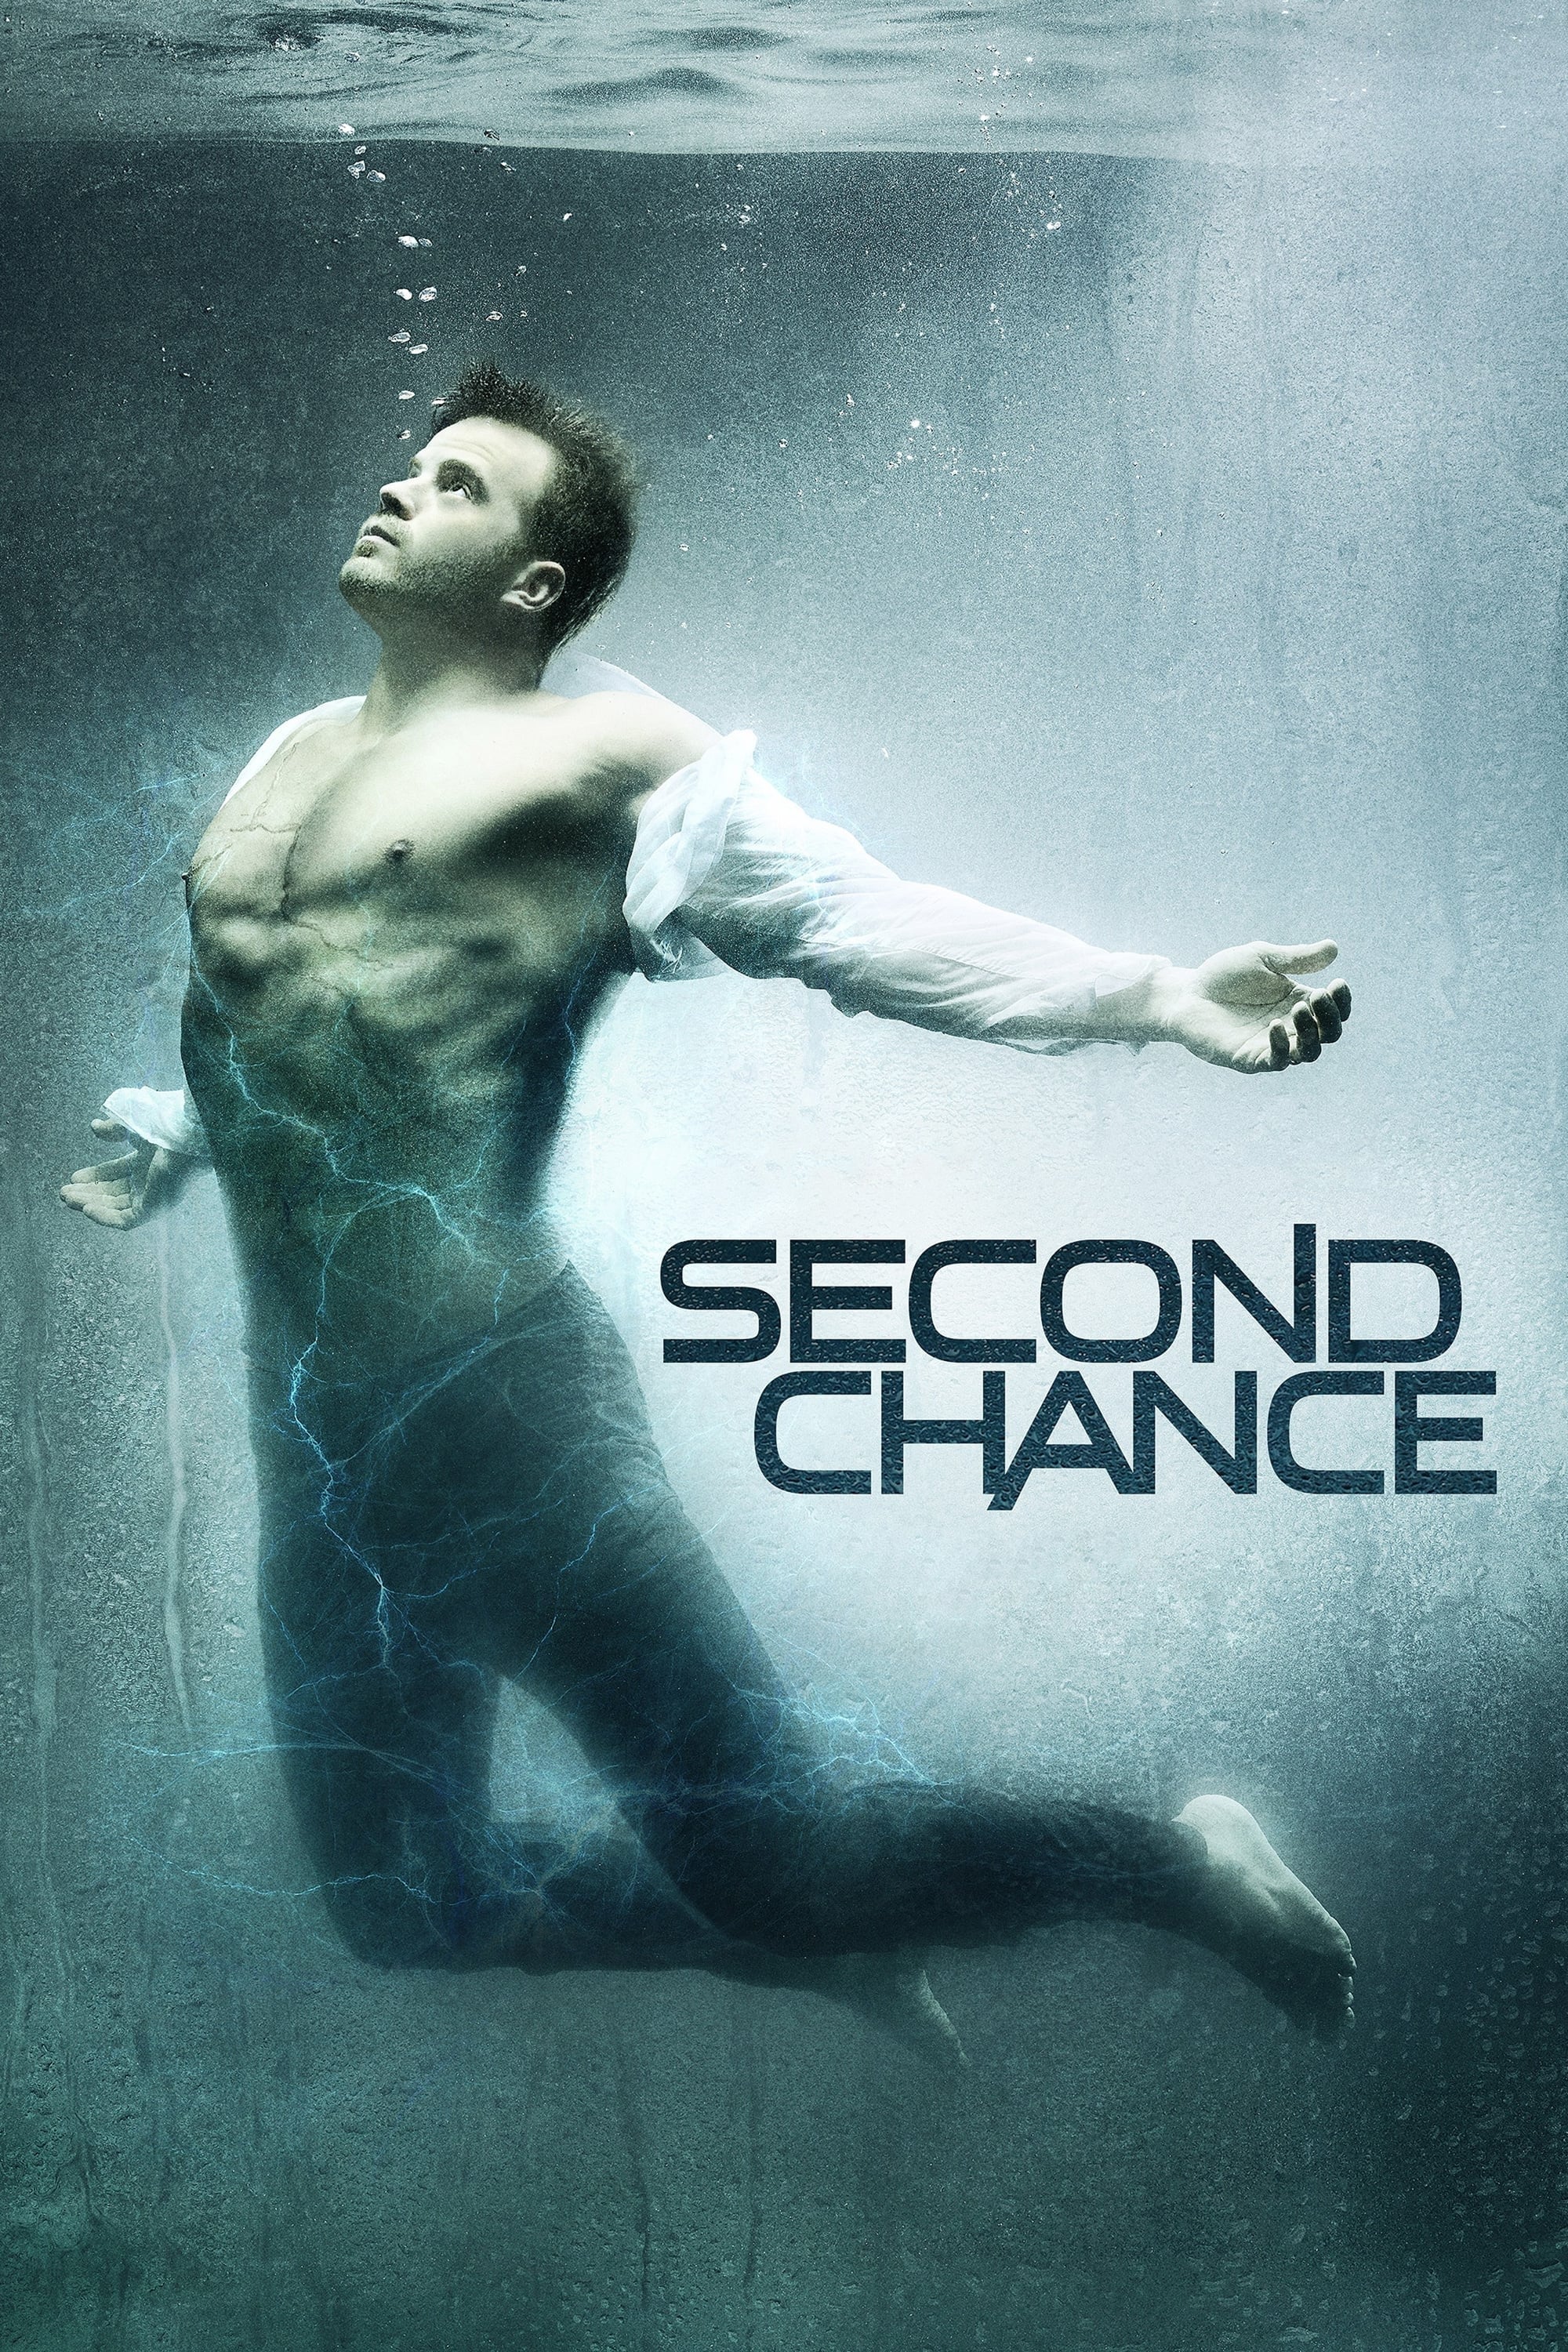 Second Chance TV Shows About Superhuman